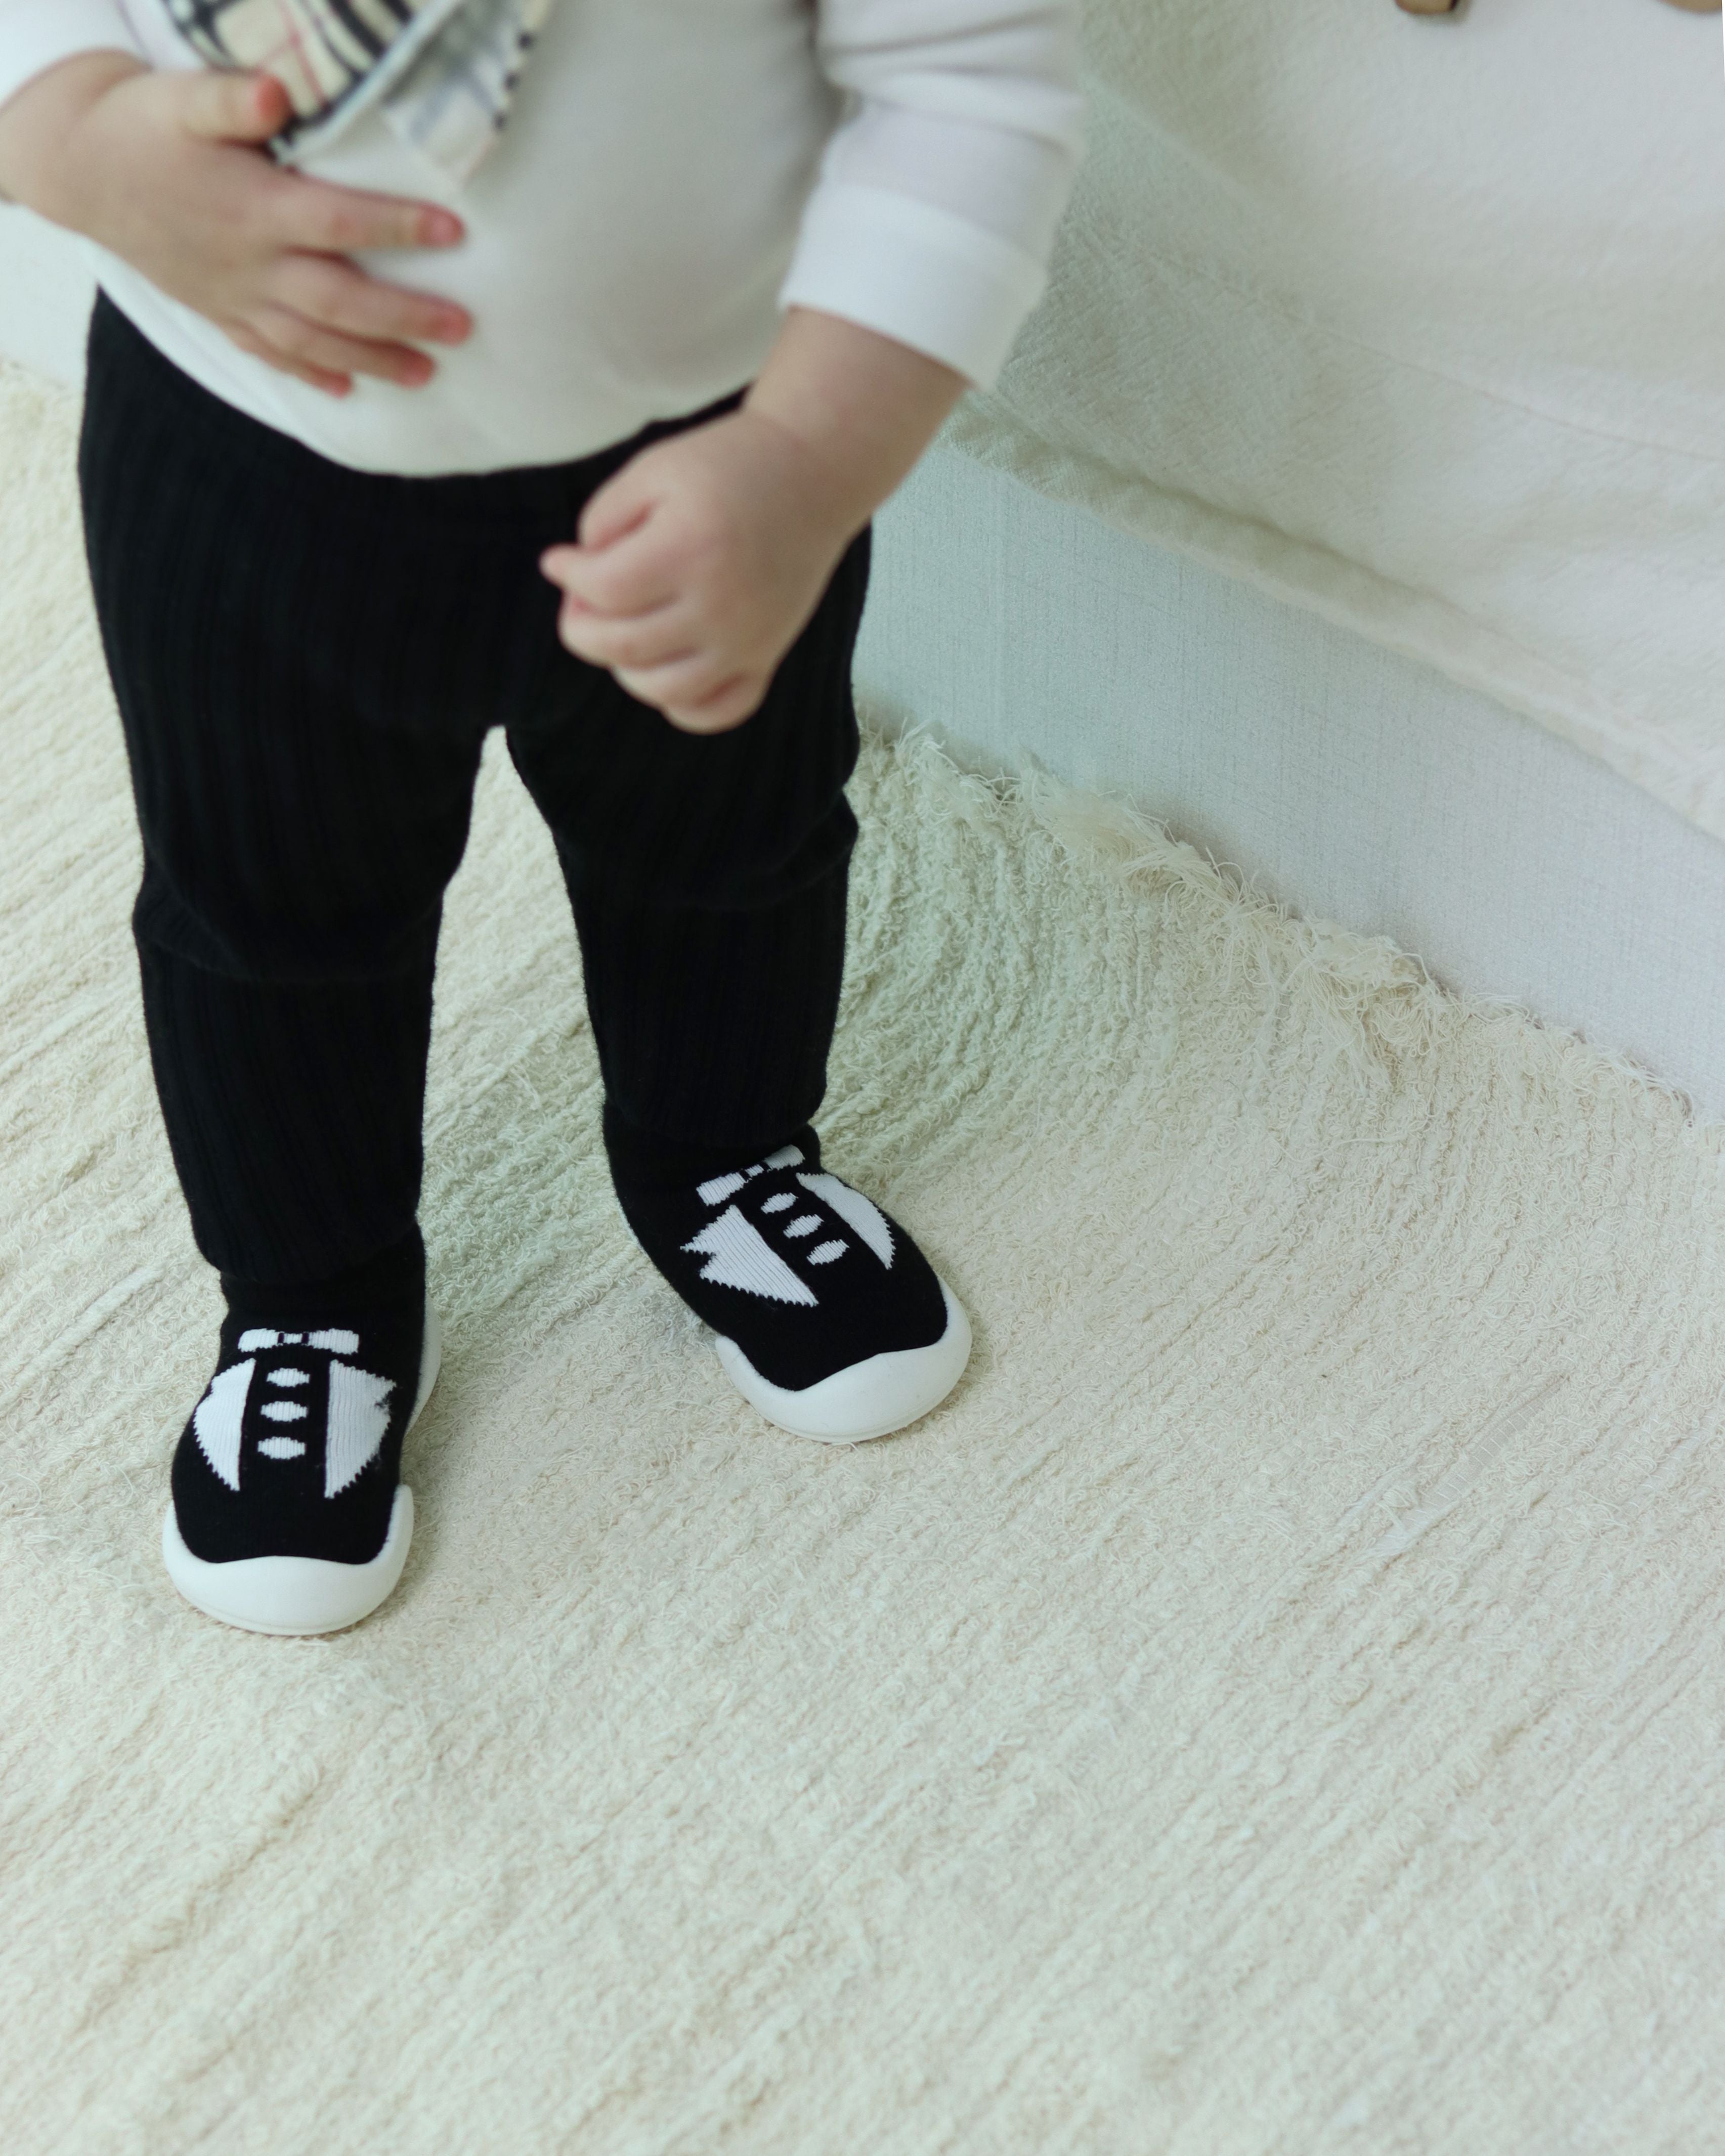 Tuxedo Baby First Walking Shoes: Elastic baby shoes with honeycomb outsole for slip resistance. Gentle flex for delicate baby foot cartilage, lightweight design for growth and learning to walk.